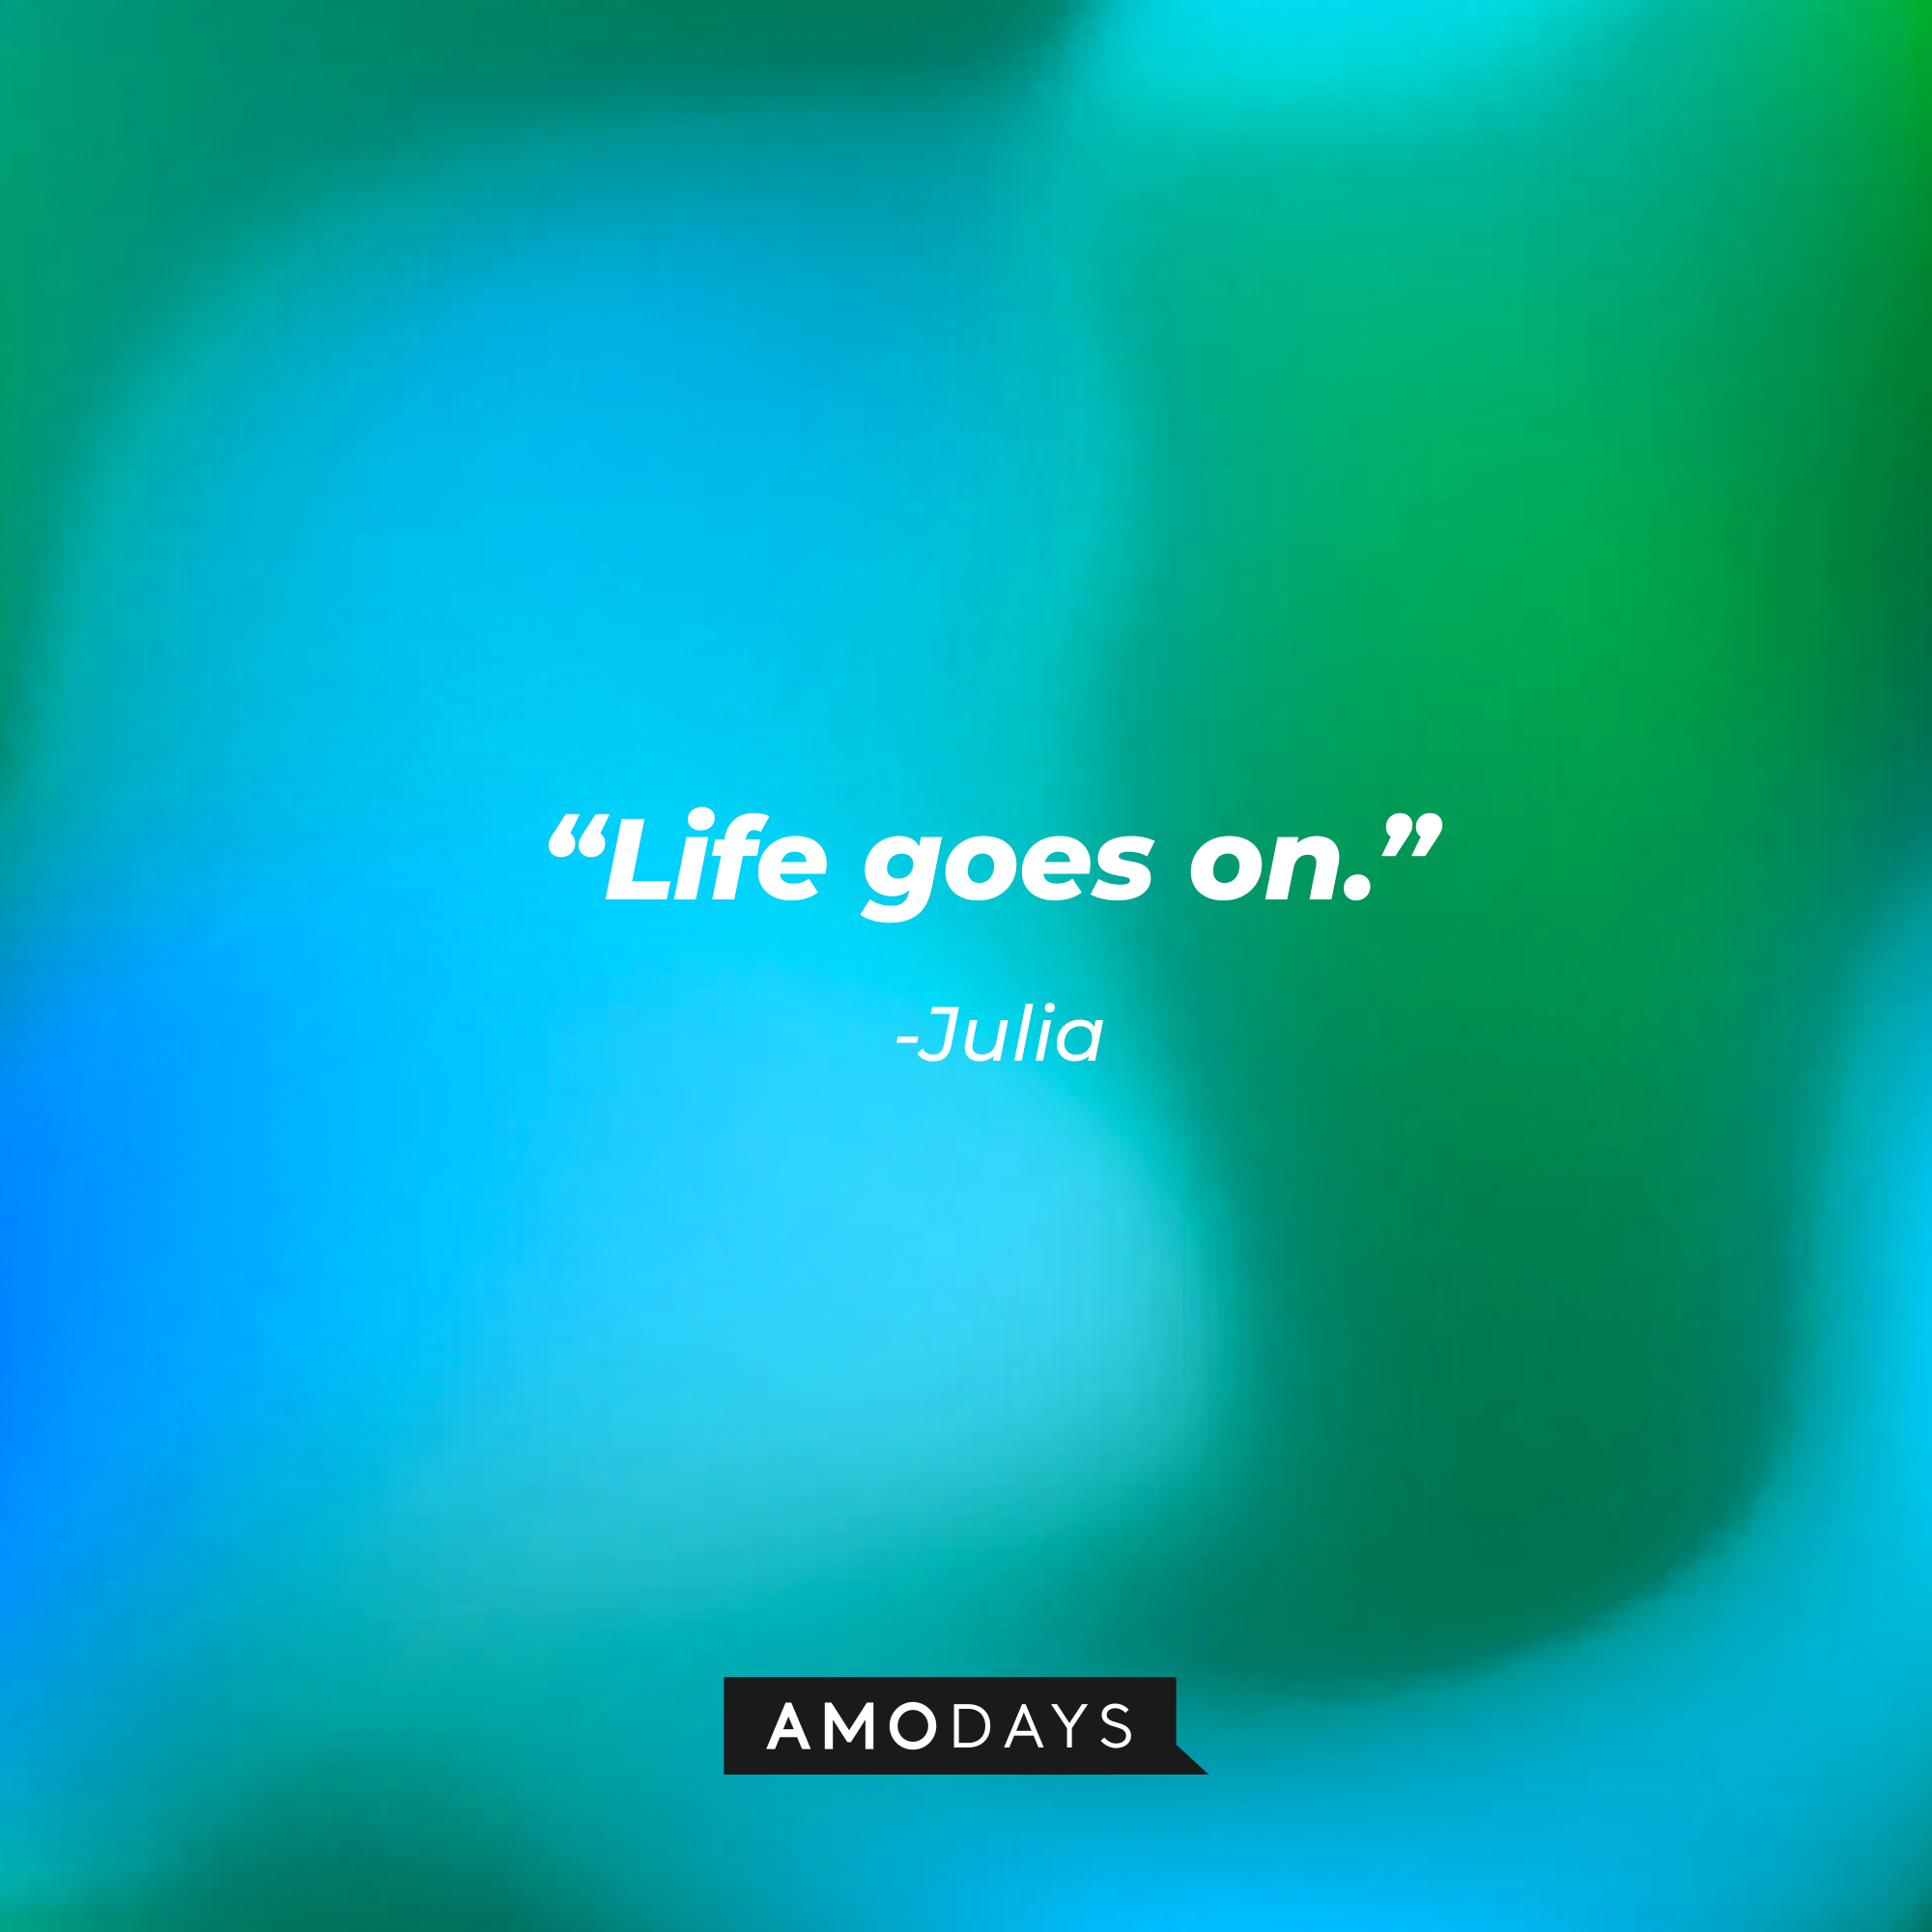 Julia's  quote: ”Life goes on.” | Source: AmoDays